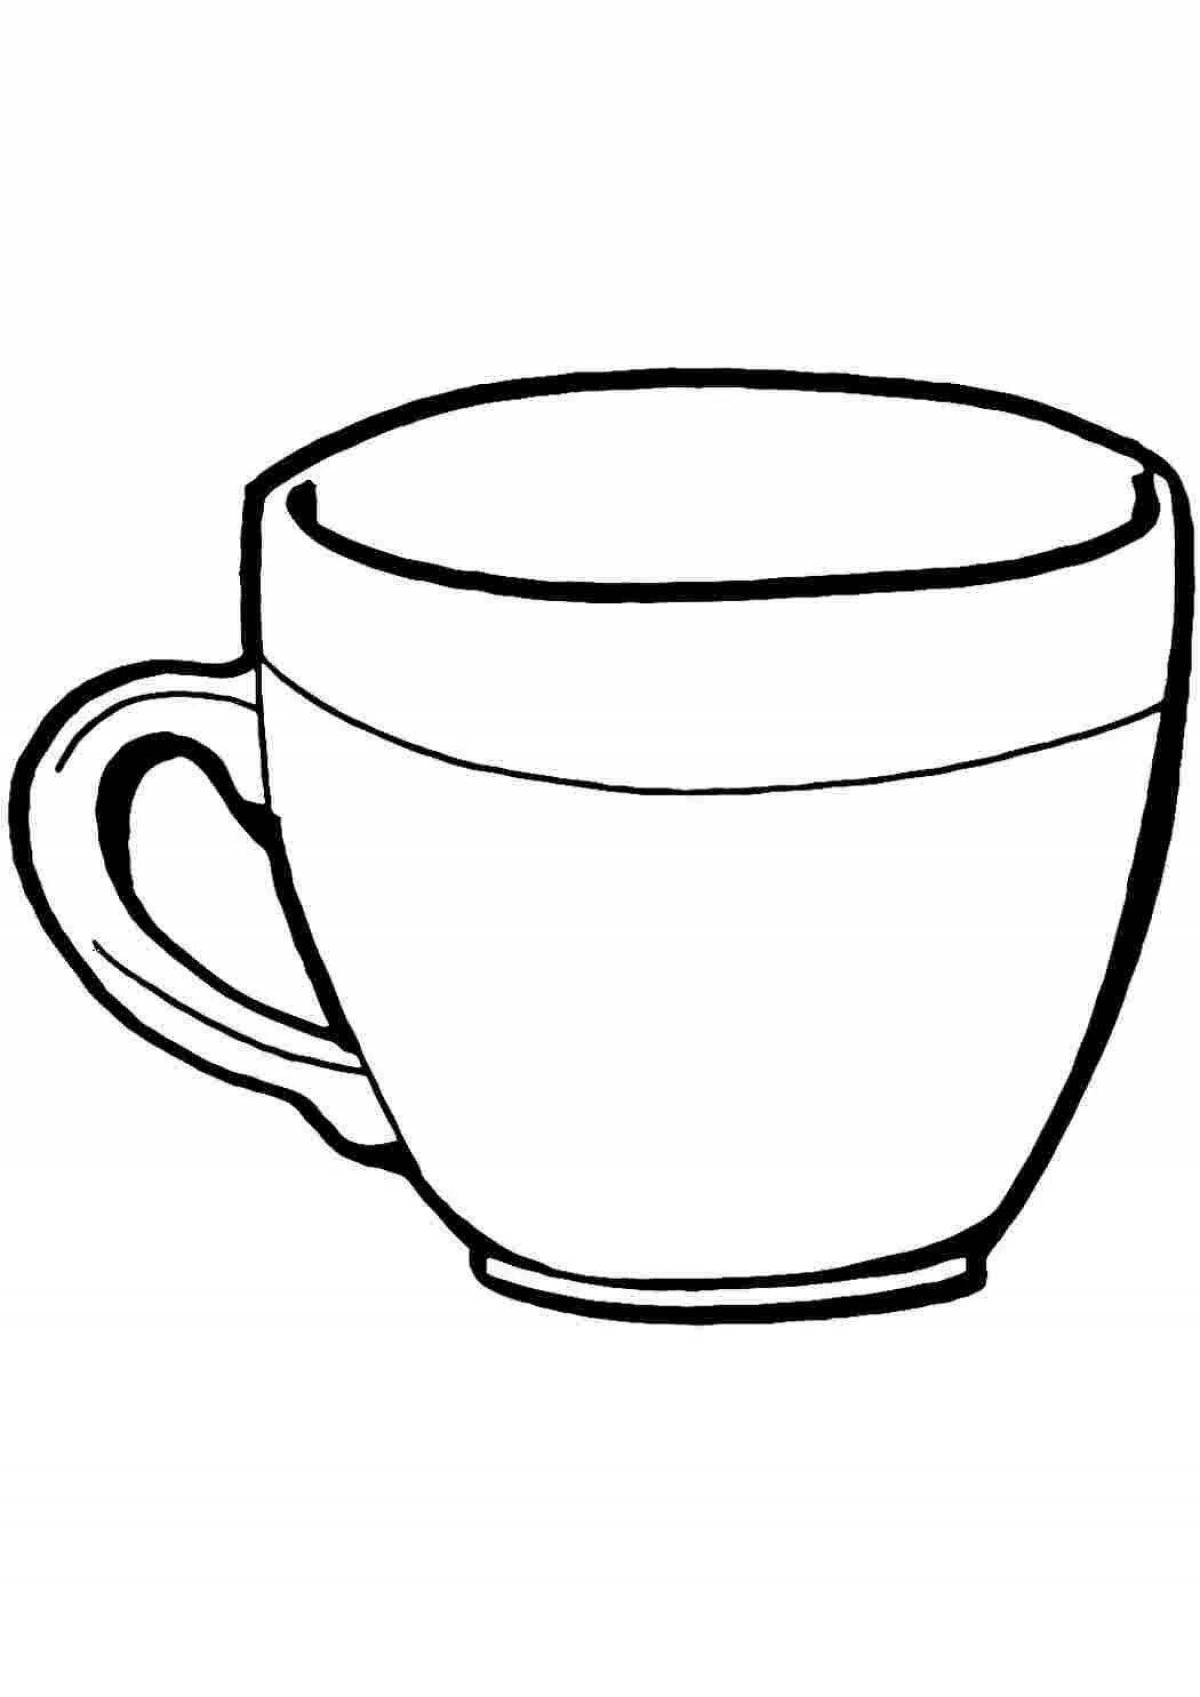 Cup picture for kids #2